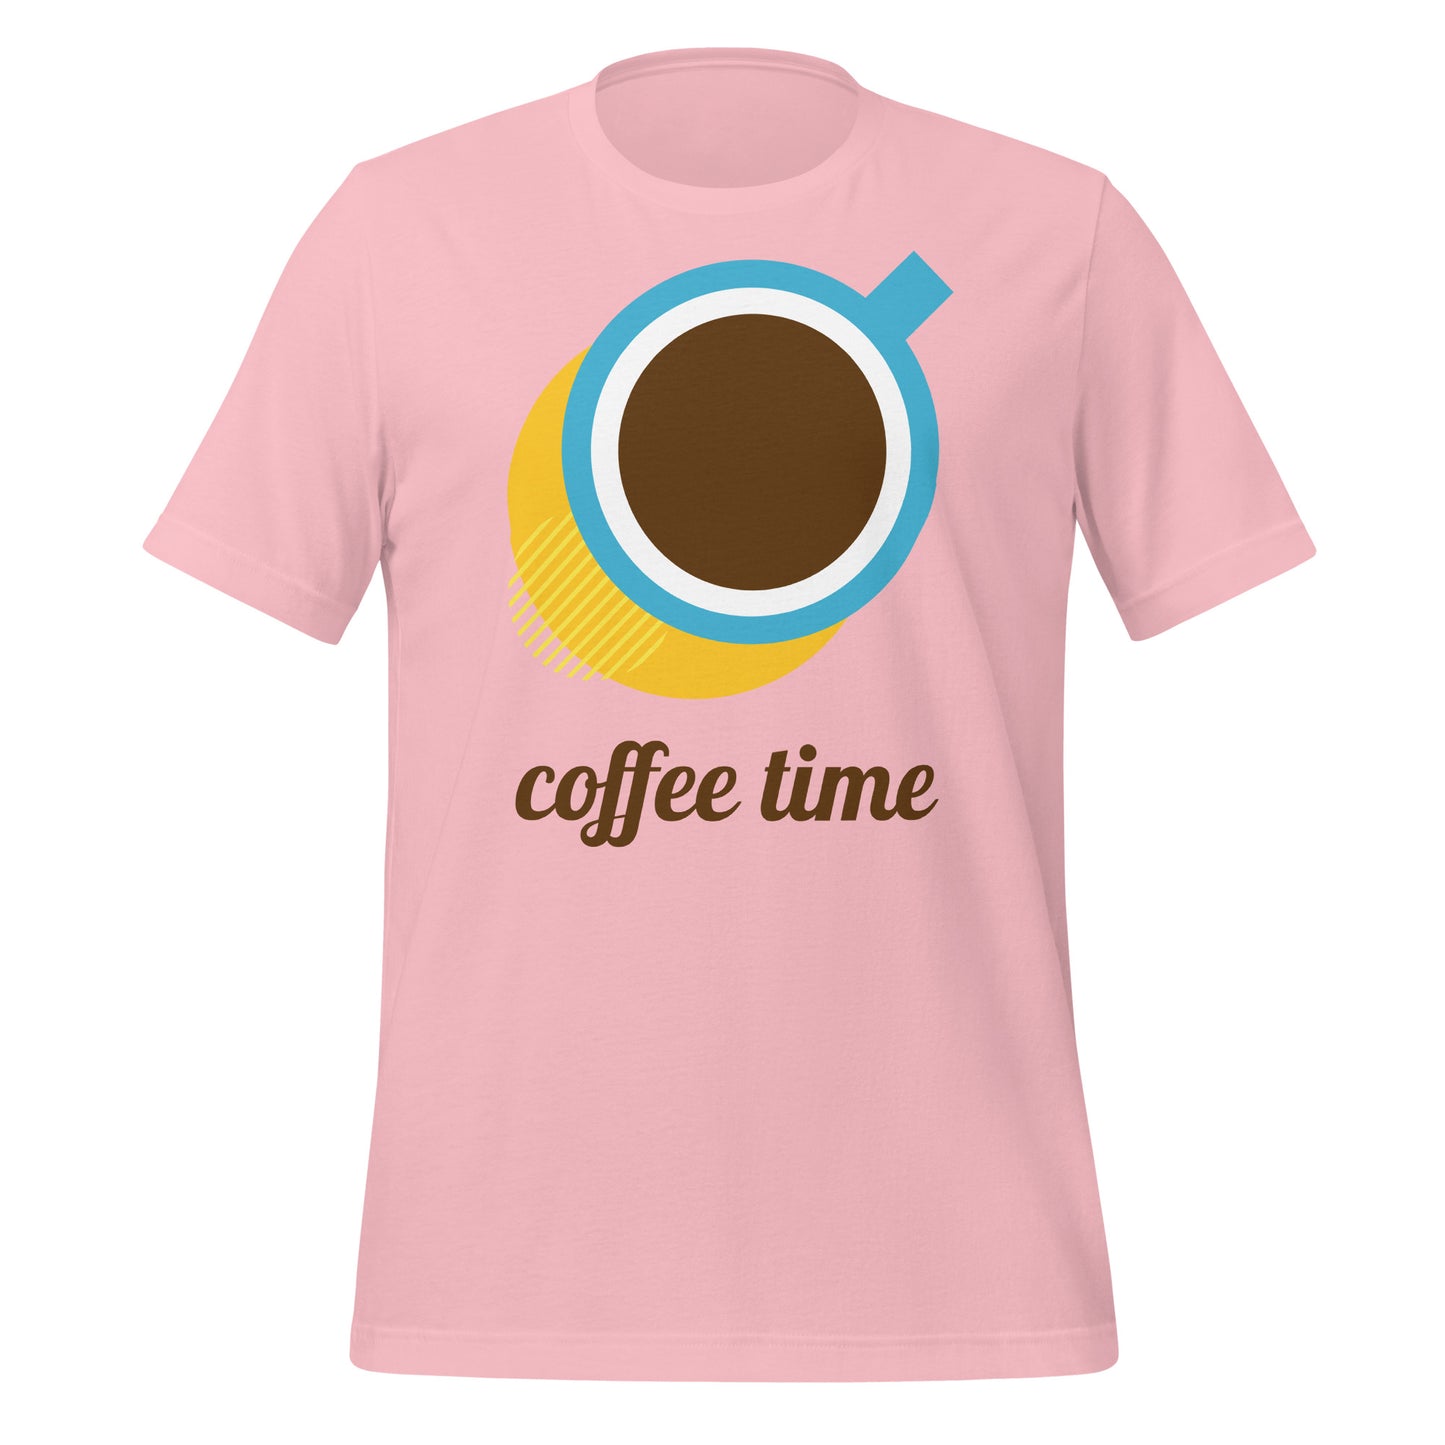 Coffee Time: Stylish T-Shirts for Caffeine Lovers!